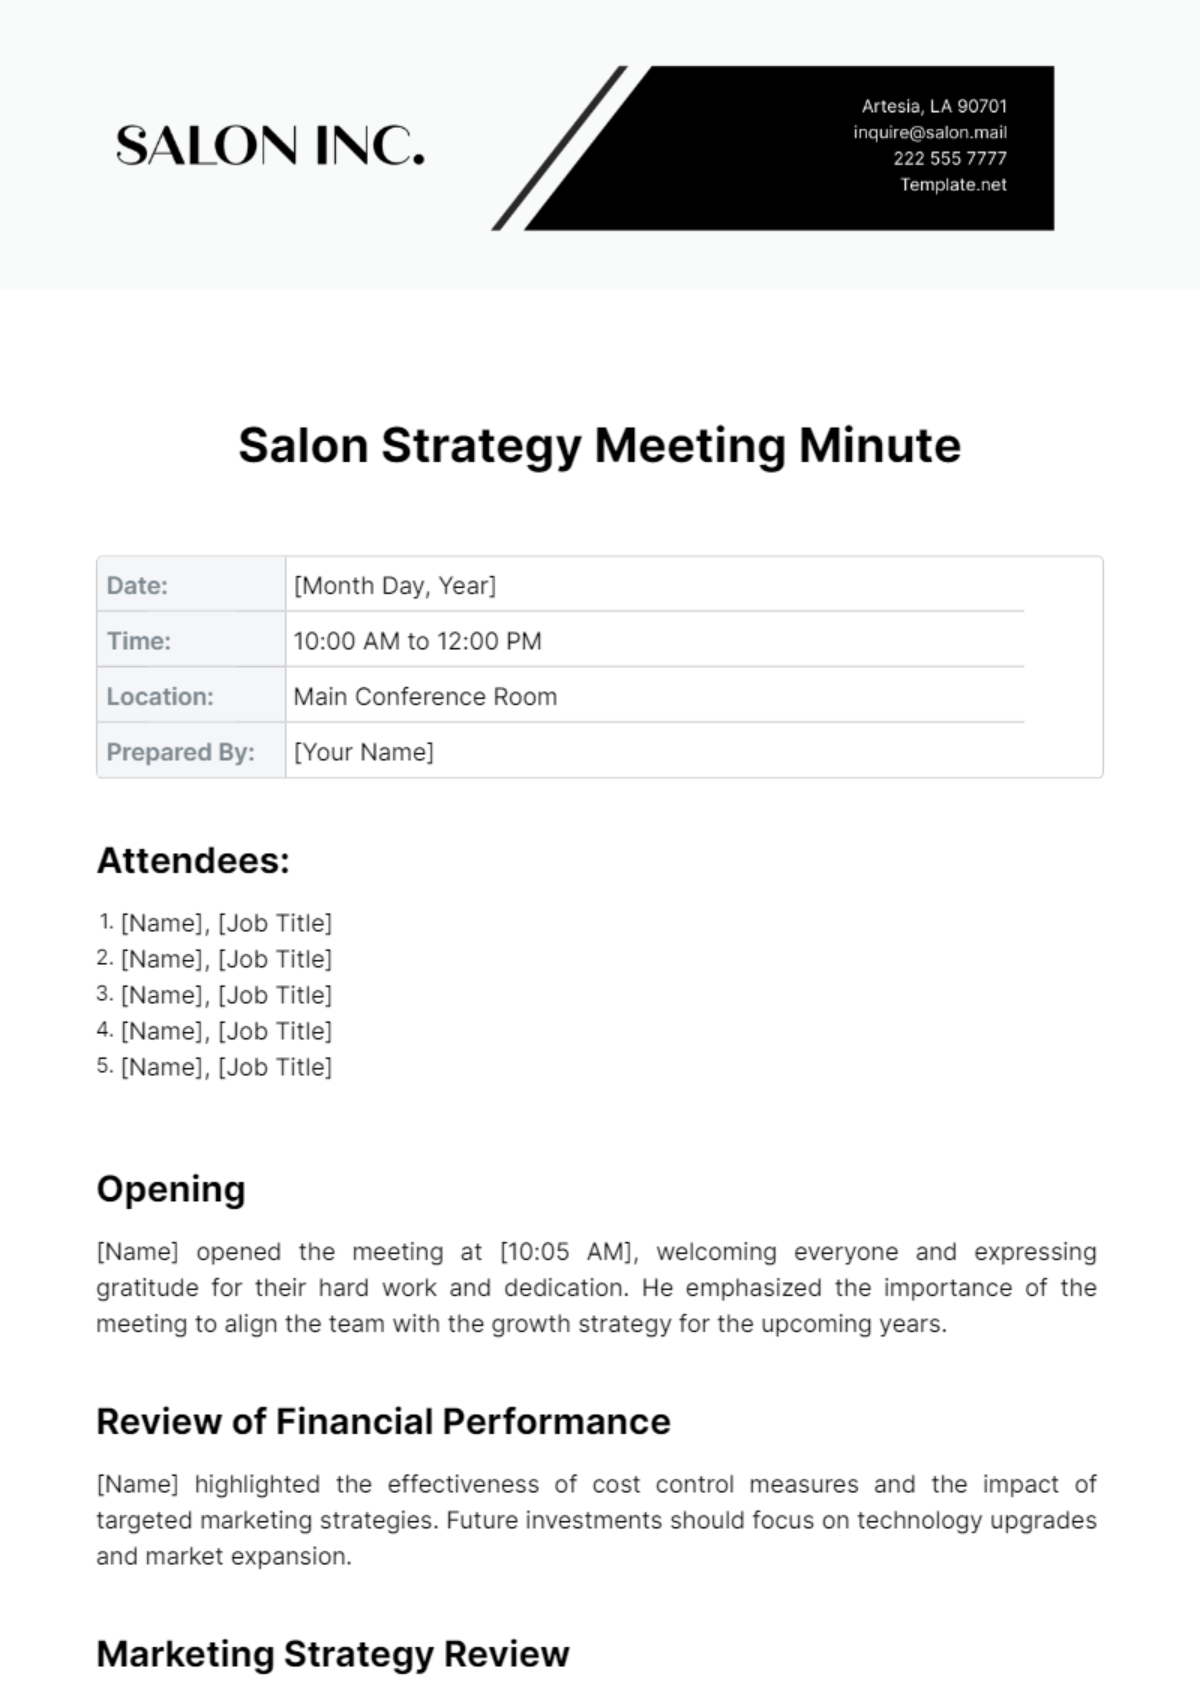 Salon Strategy Meeting Minute Template